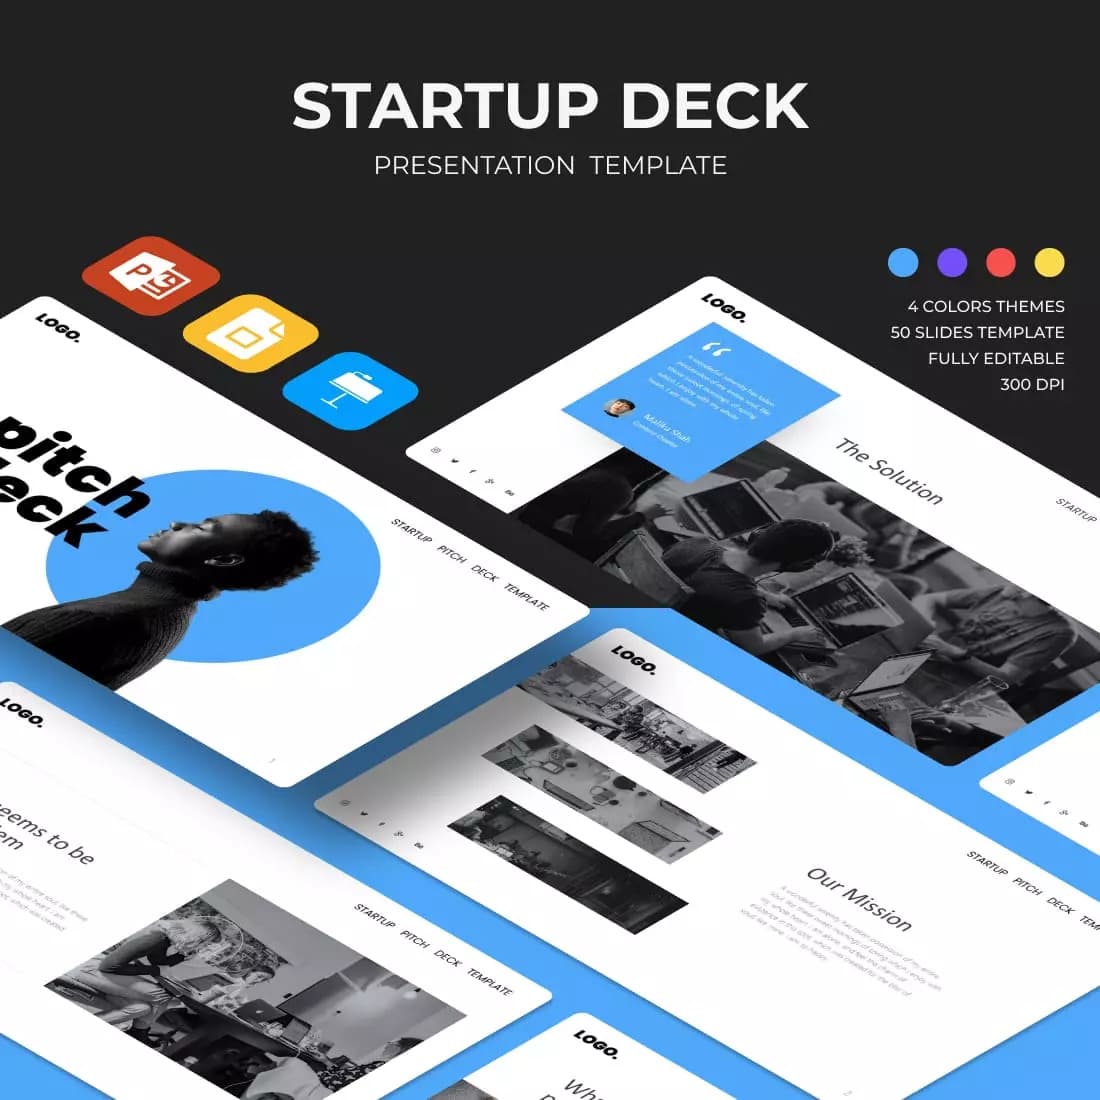 Startup Pitch Deck Presentation Template Preview image.